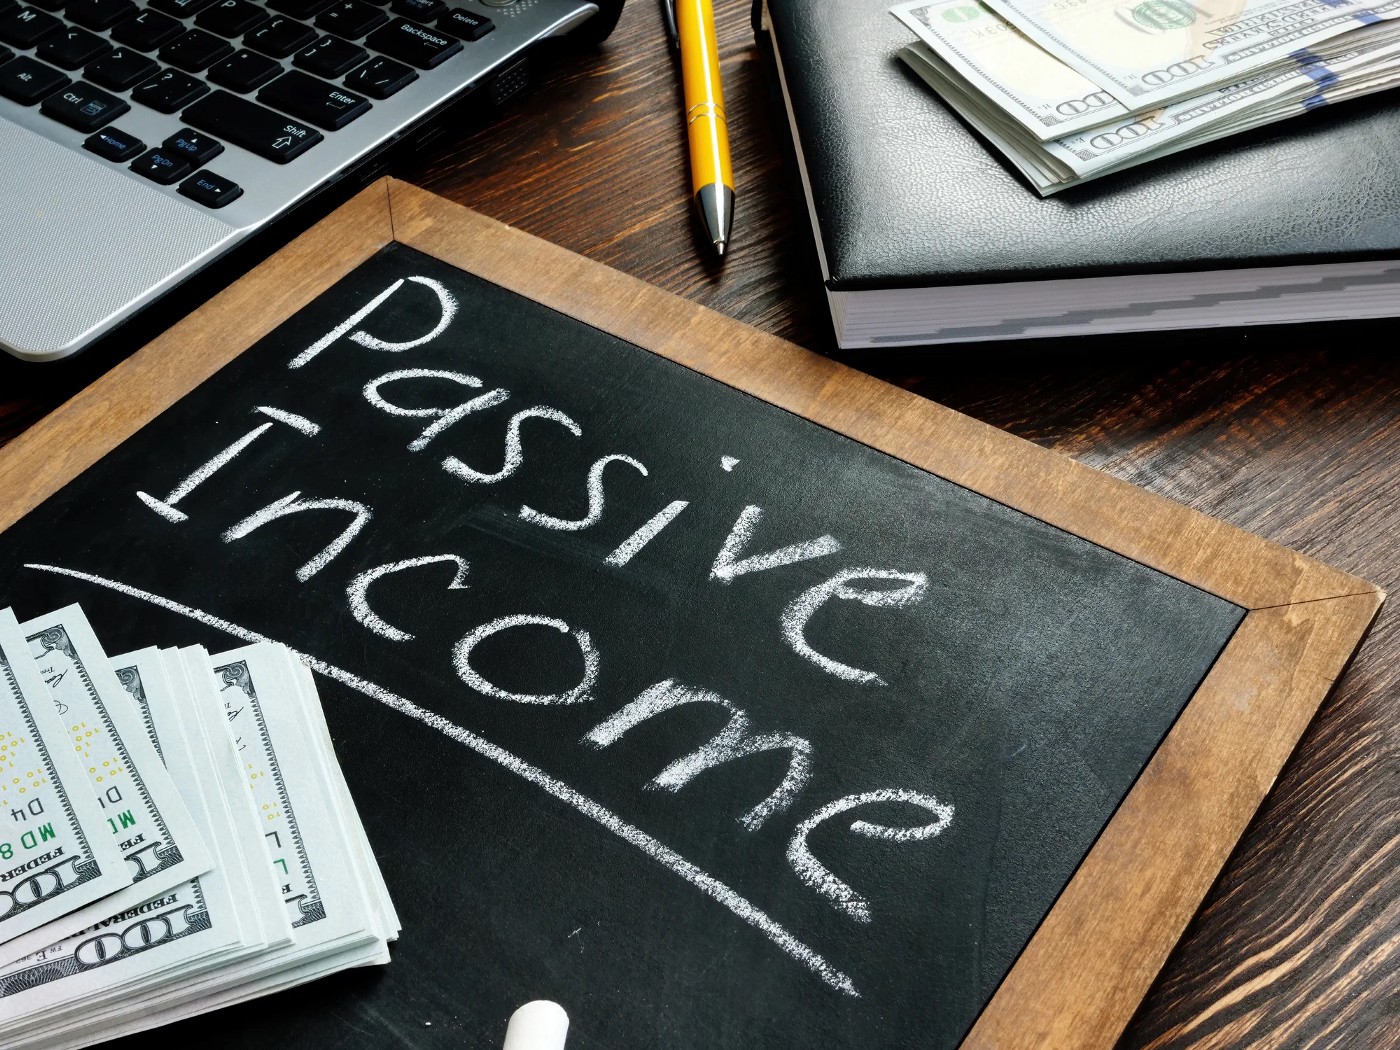 Featured post graphic for how In Writing helps with passive income generation